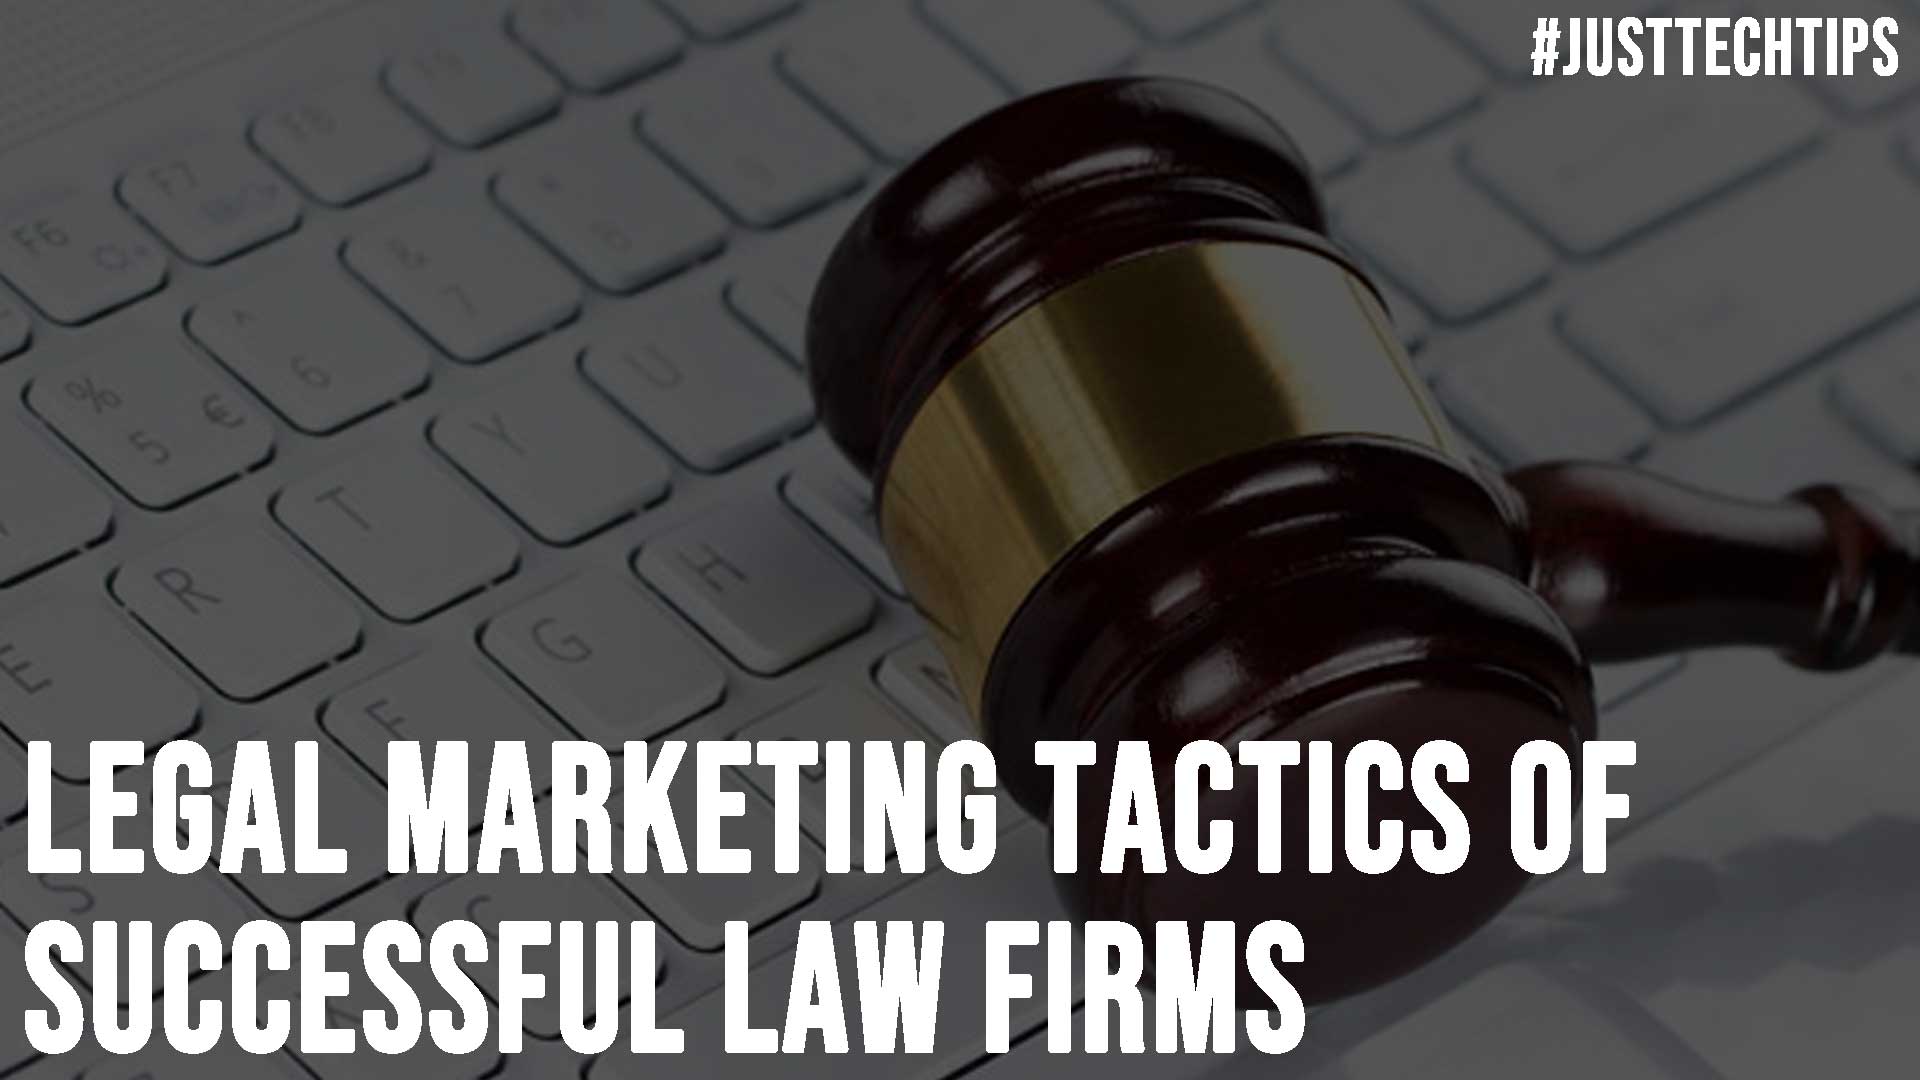 Legal Marketing Tactics of Successful Law Firms